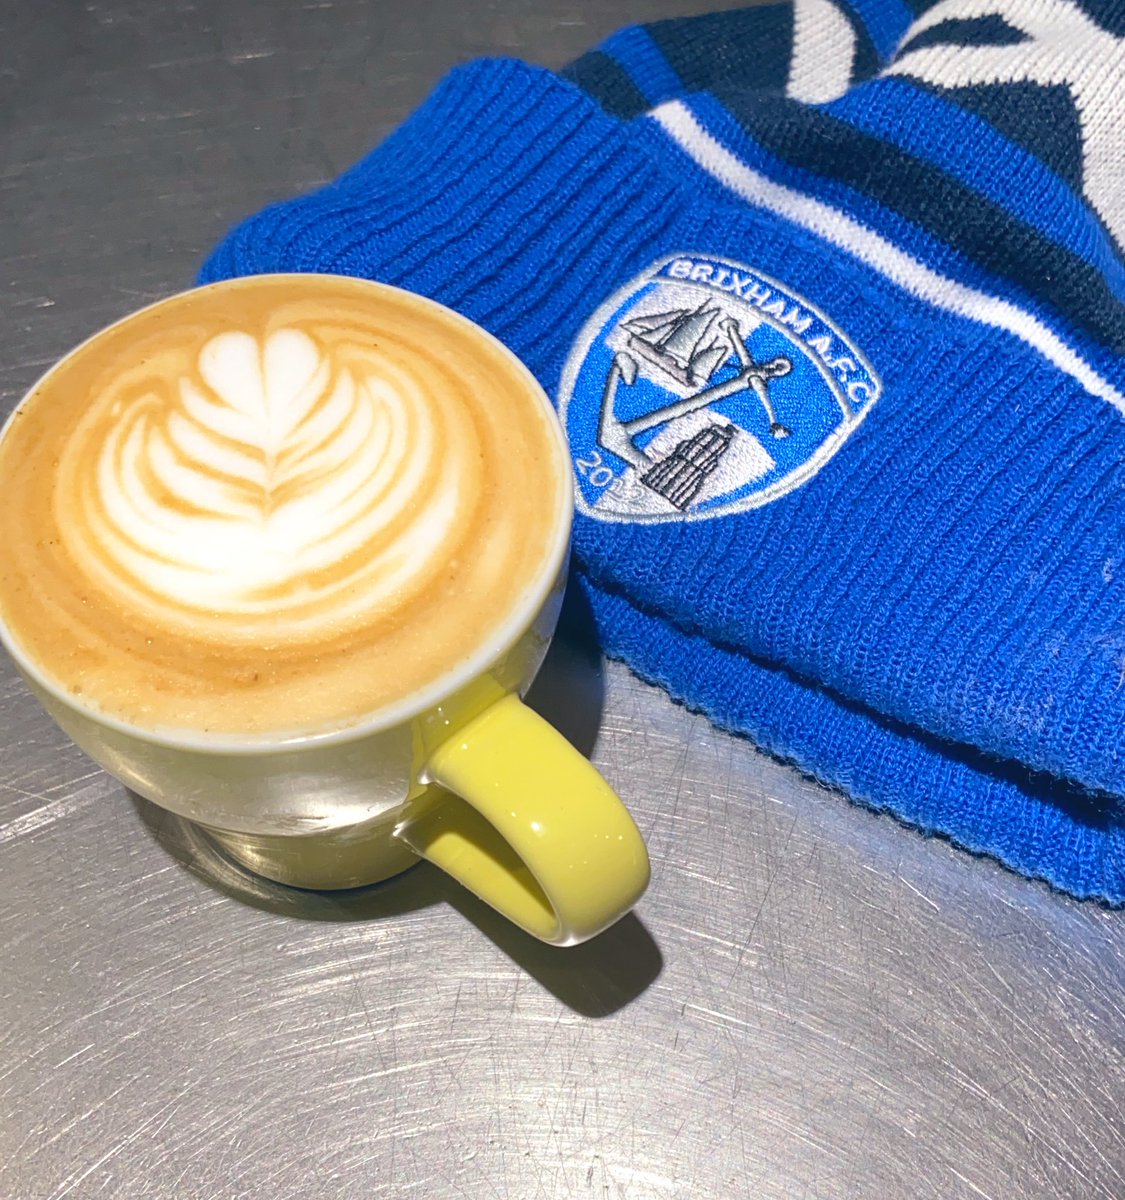 The great thing about owning @5DoorsHQ and starting work at 4am is while i’m waiting for dough to proof, I get enjoy the most delicious coffee! #imissrealfootball #brixhamafc #thefishermen #atwork #craftbakery